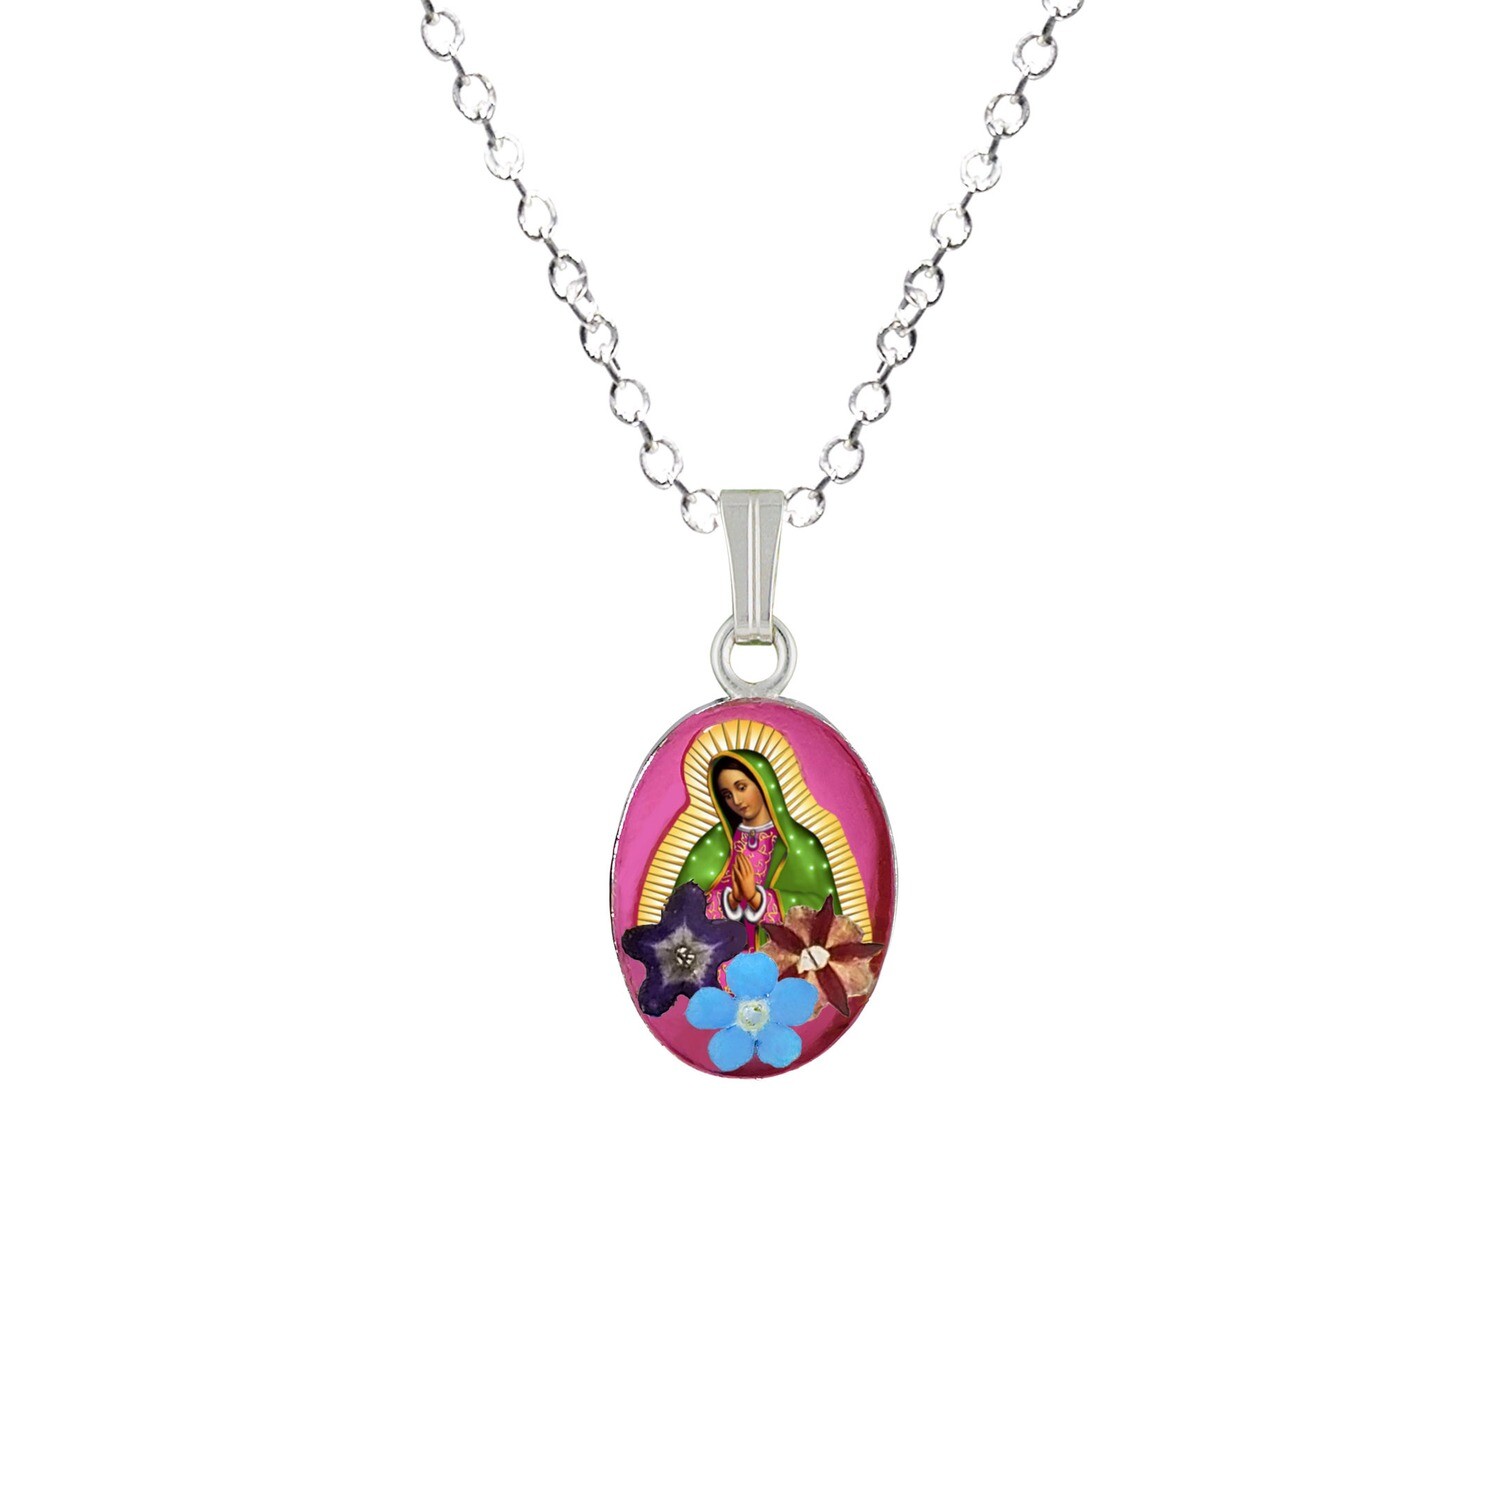 Guadalupe Virgen, Small Oval Pendant, Pink, Rhodium Plated